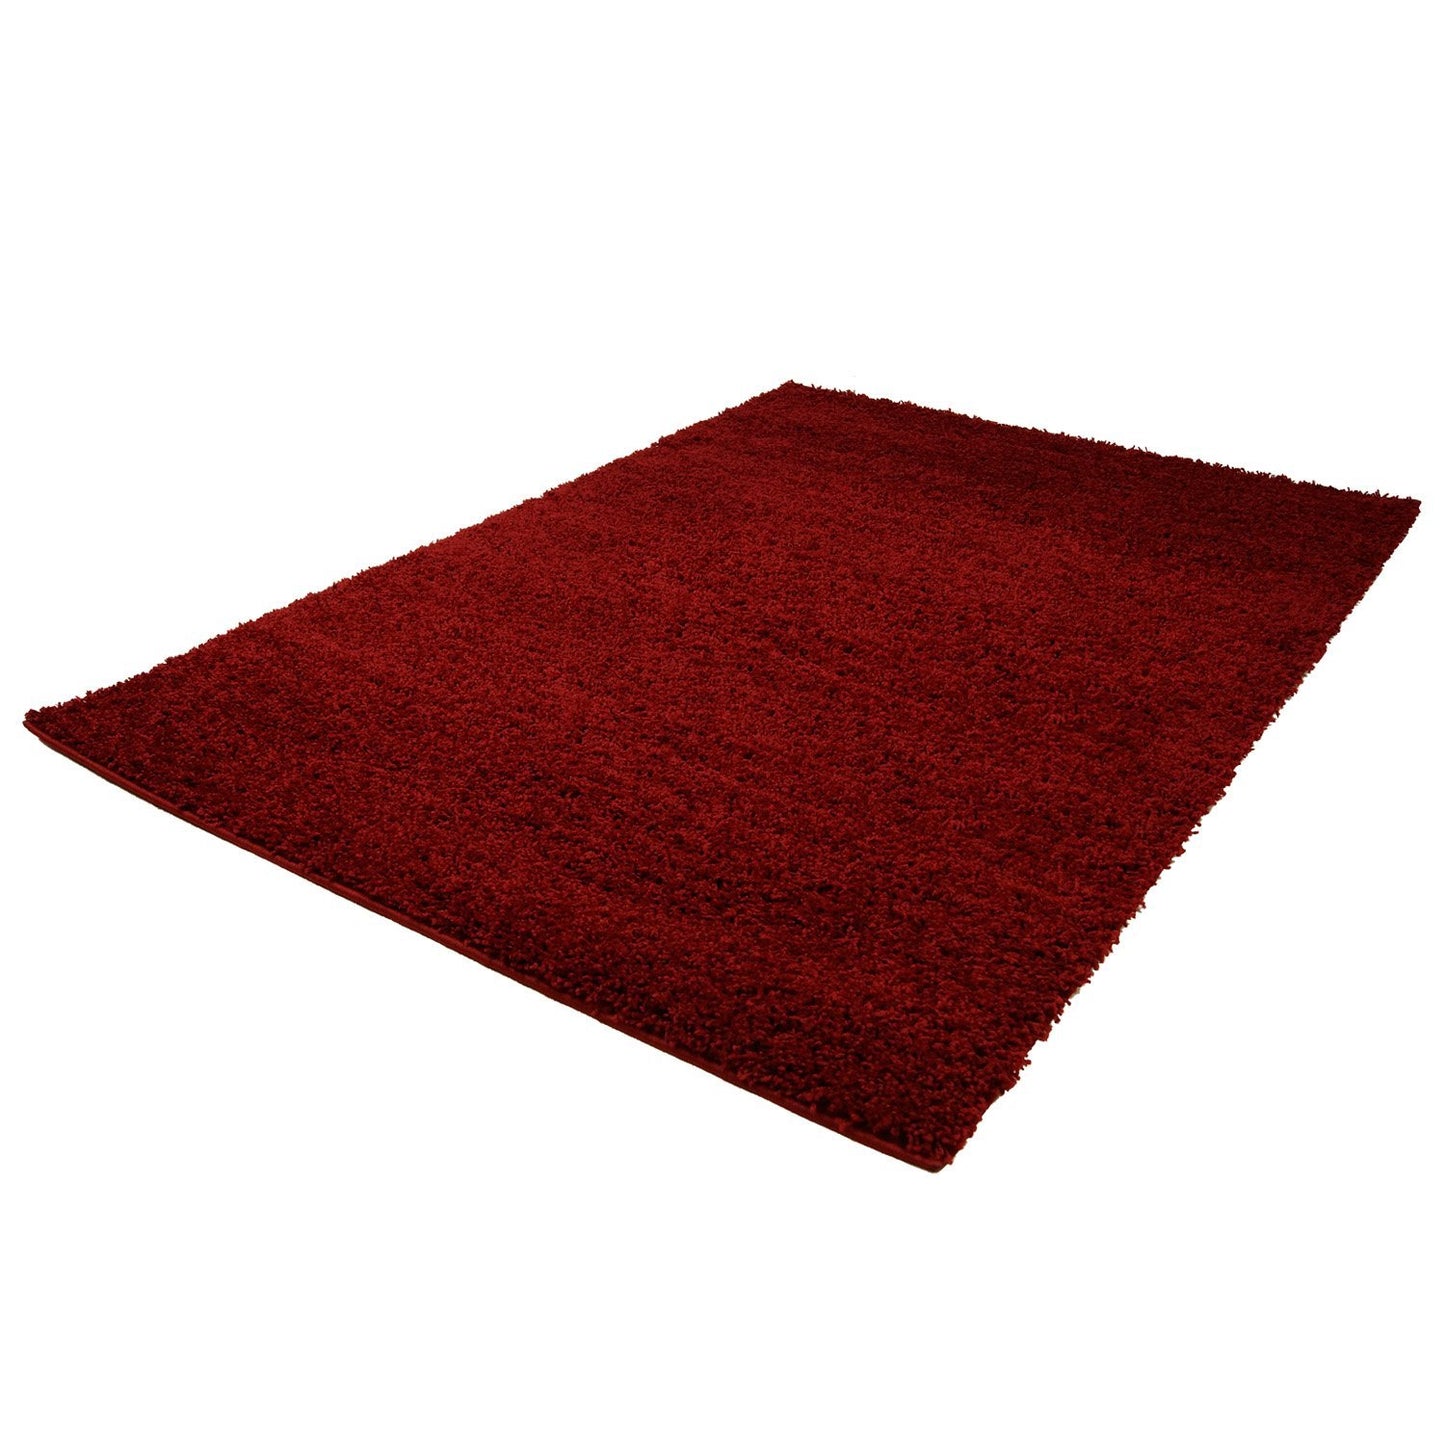 Shaggy Red Area Rug - 